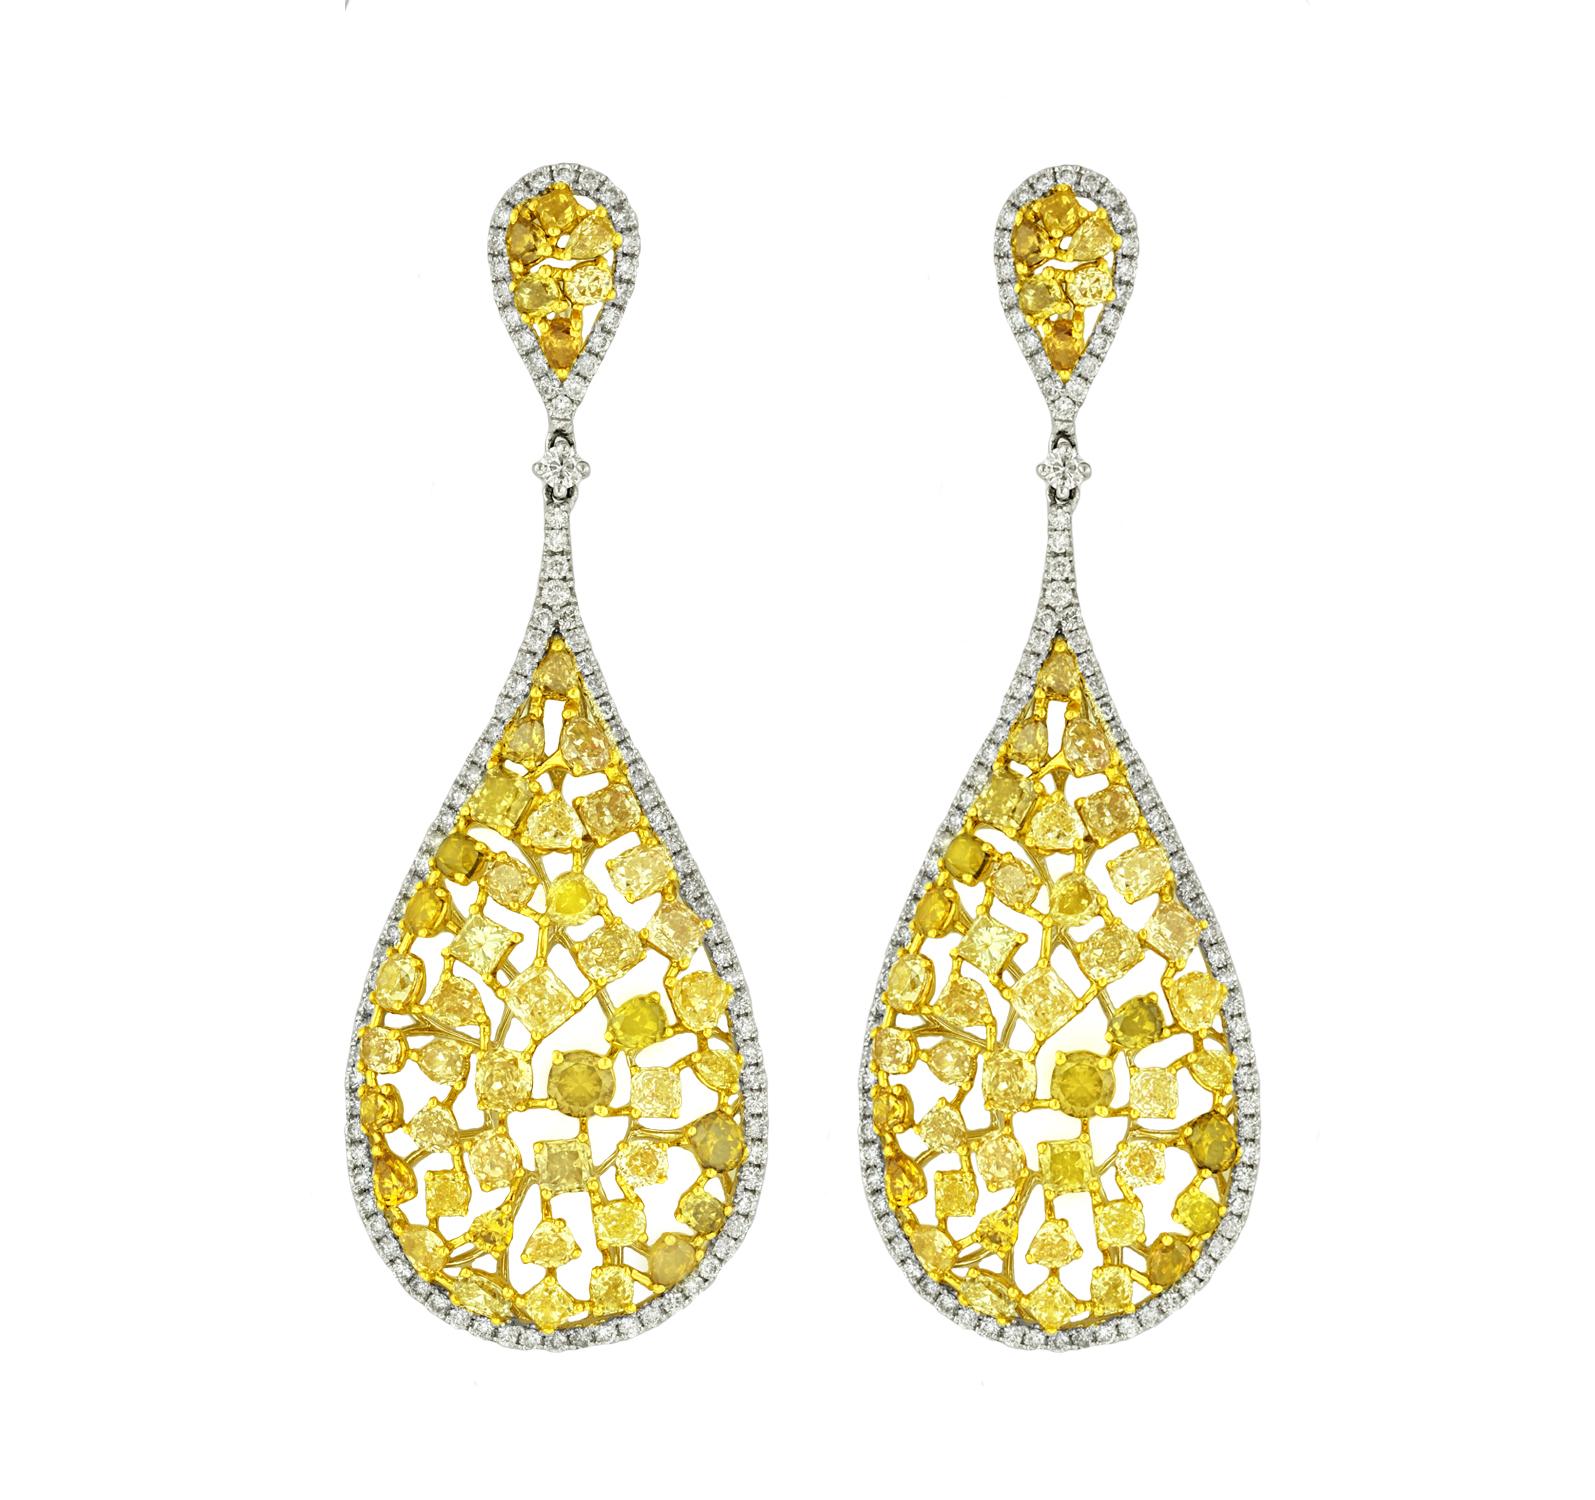 18K White and Yellow Diamond Earrings featuring 12.59 Carat T.W. of Natural Fancy Yellow and White Diamonds

Underline your look with this sharp 18K White and Yellow Diamond Earrings. High quality Diamonds. This Earrings will underline your